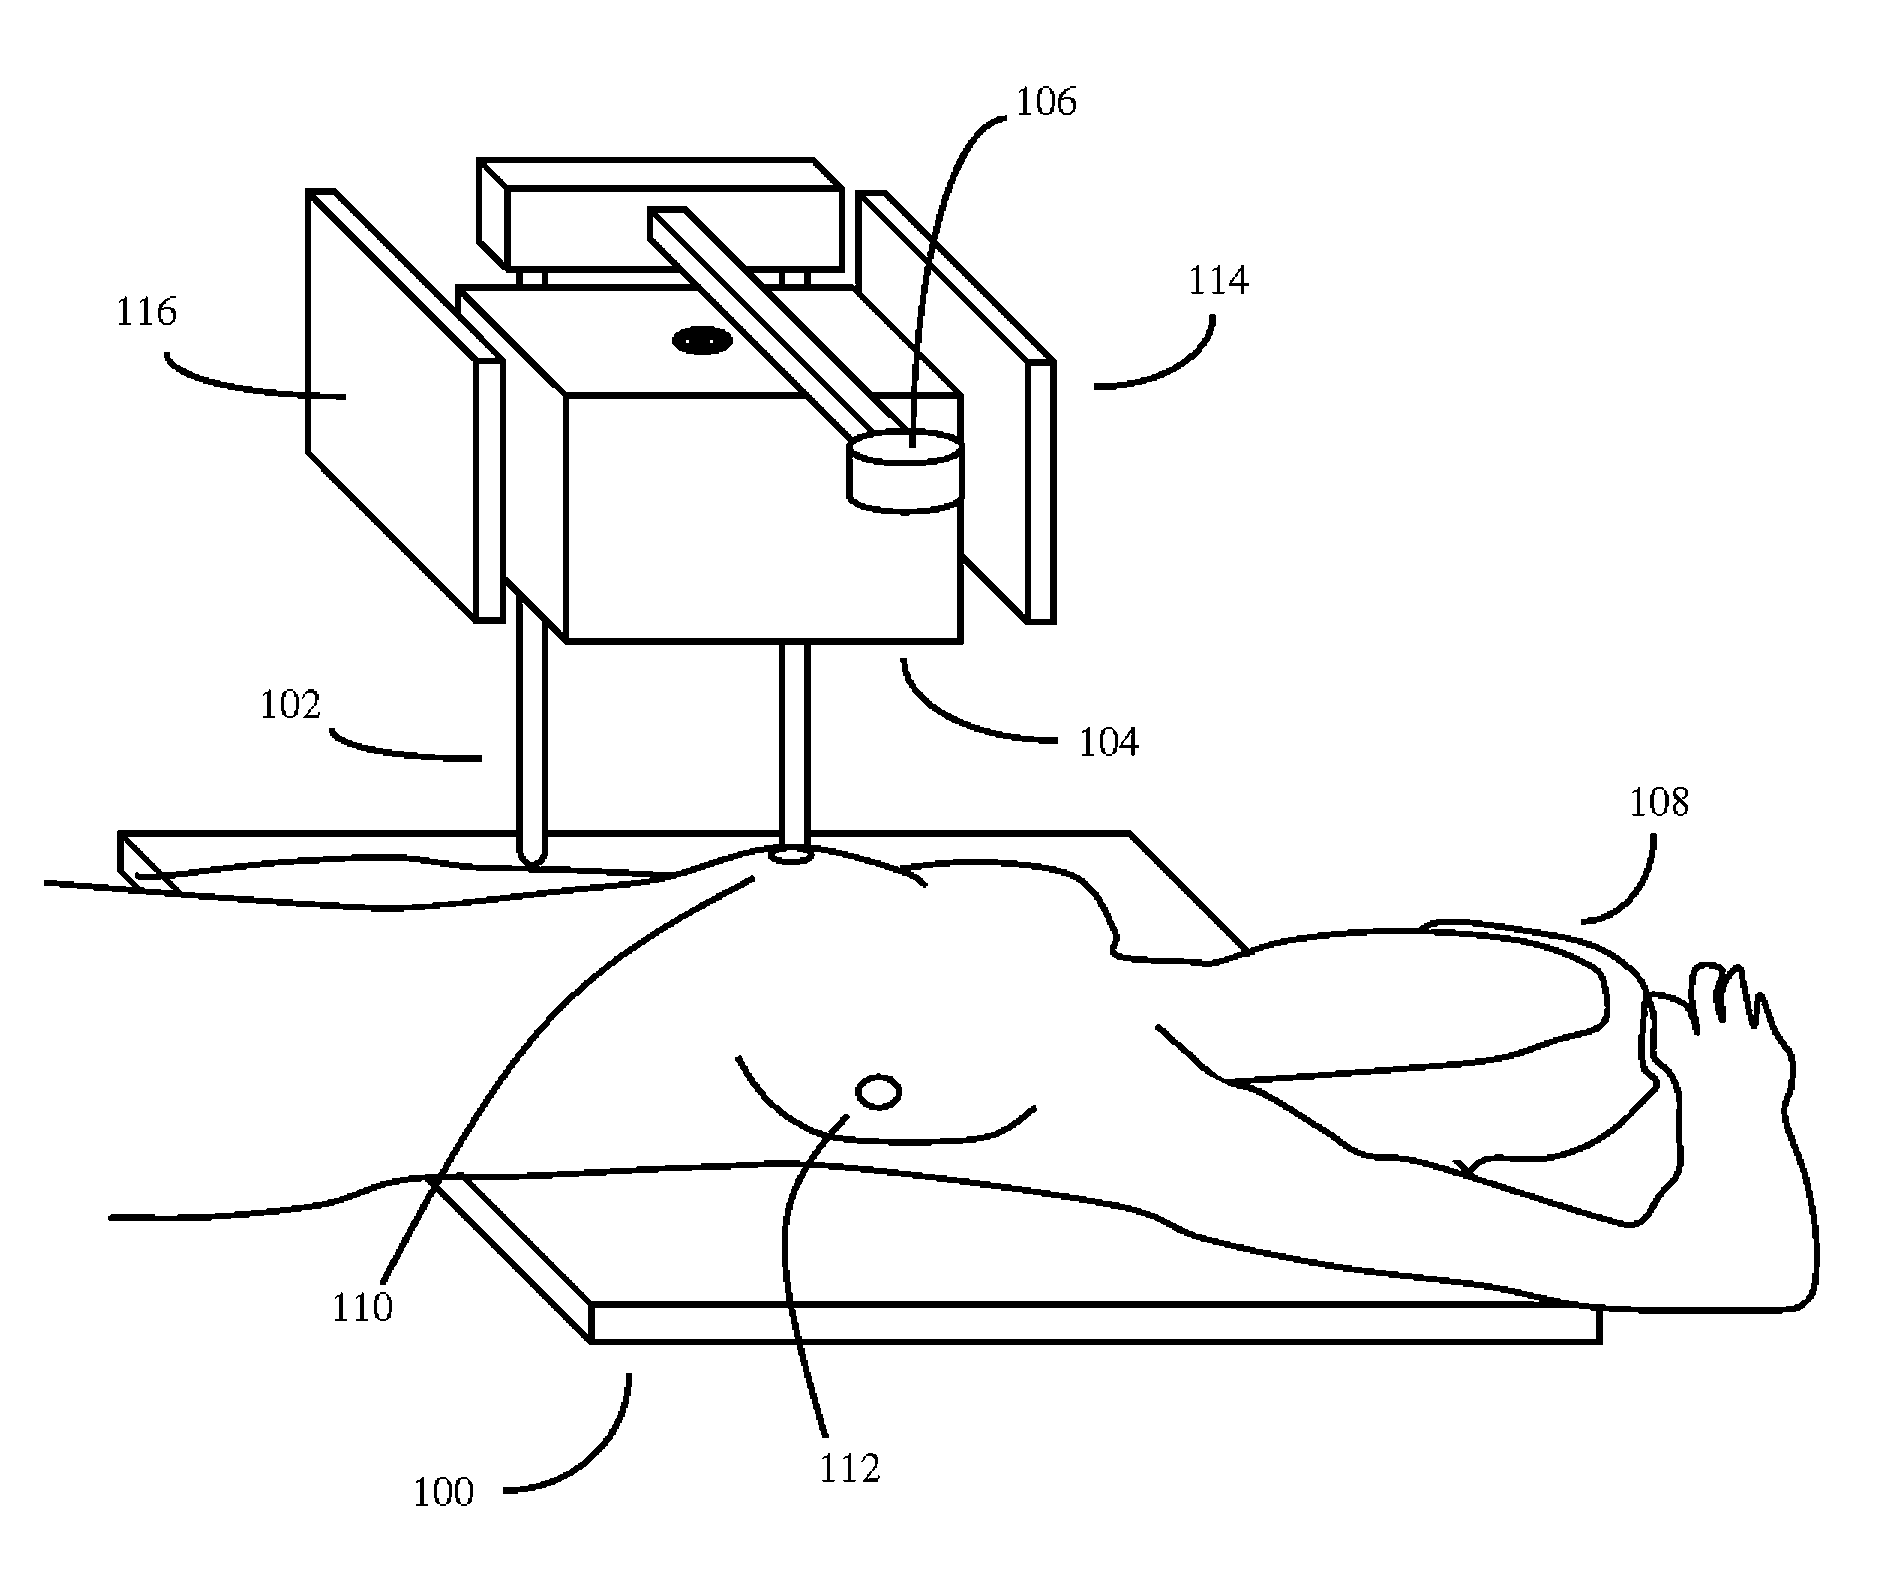 Self-administered breast ultrasonic imaging systems